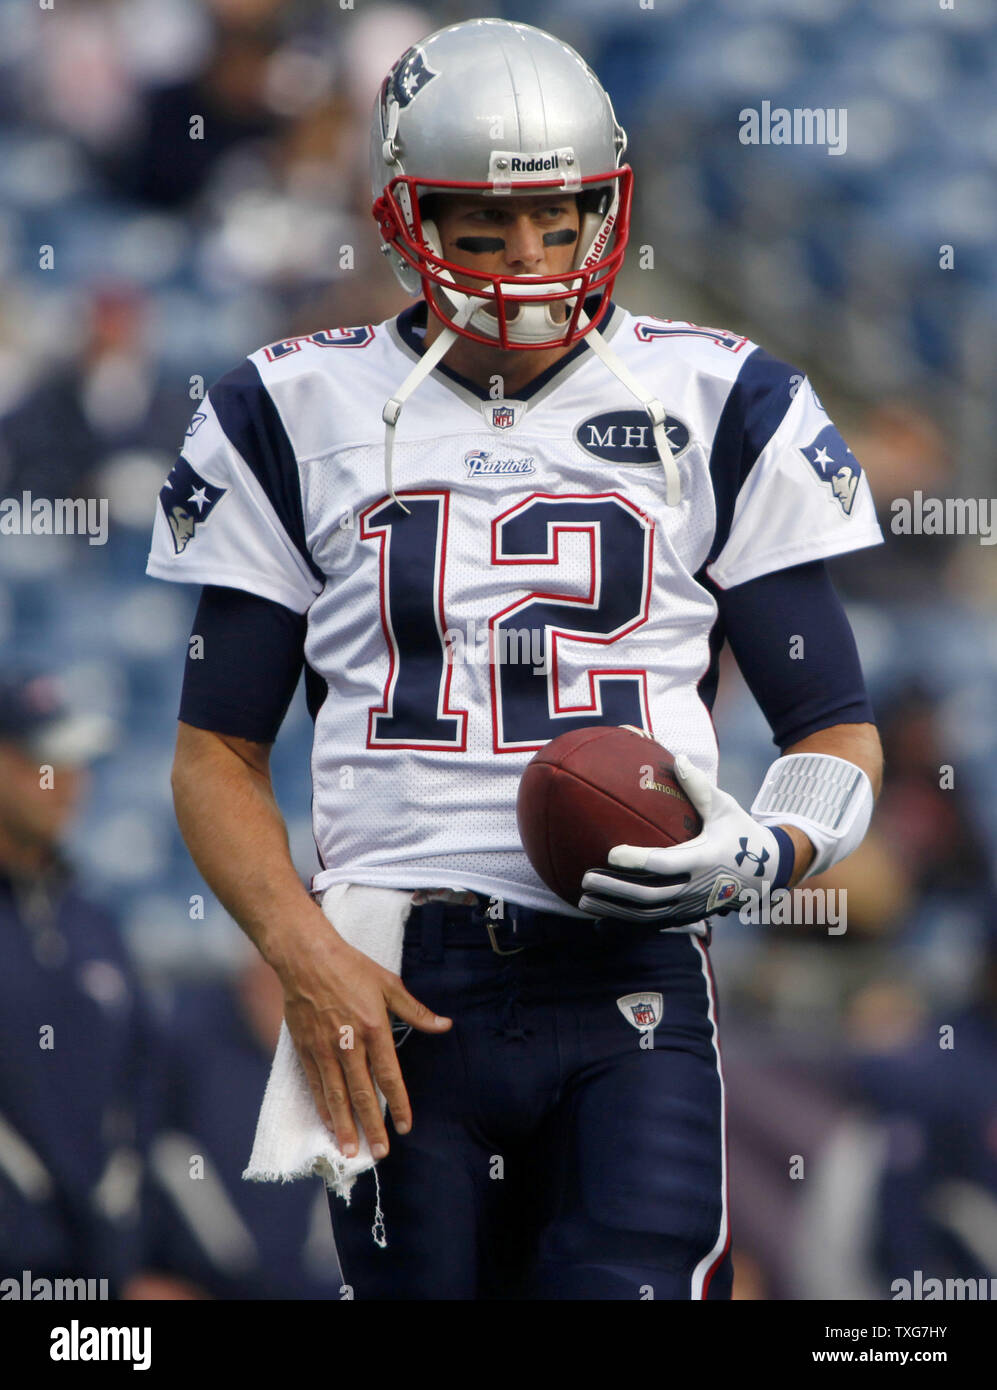 New England Patriots quarterback Tom Brady warms up with teammates before the game against the Dallas Cowboys at Gillette Stadium in Foxboro, Massachusetts on October 16, 2011.    UPI/Matthew Healey Stock Photo